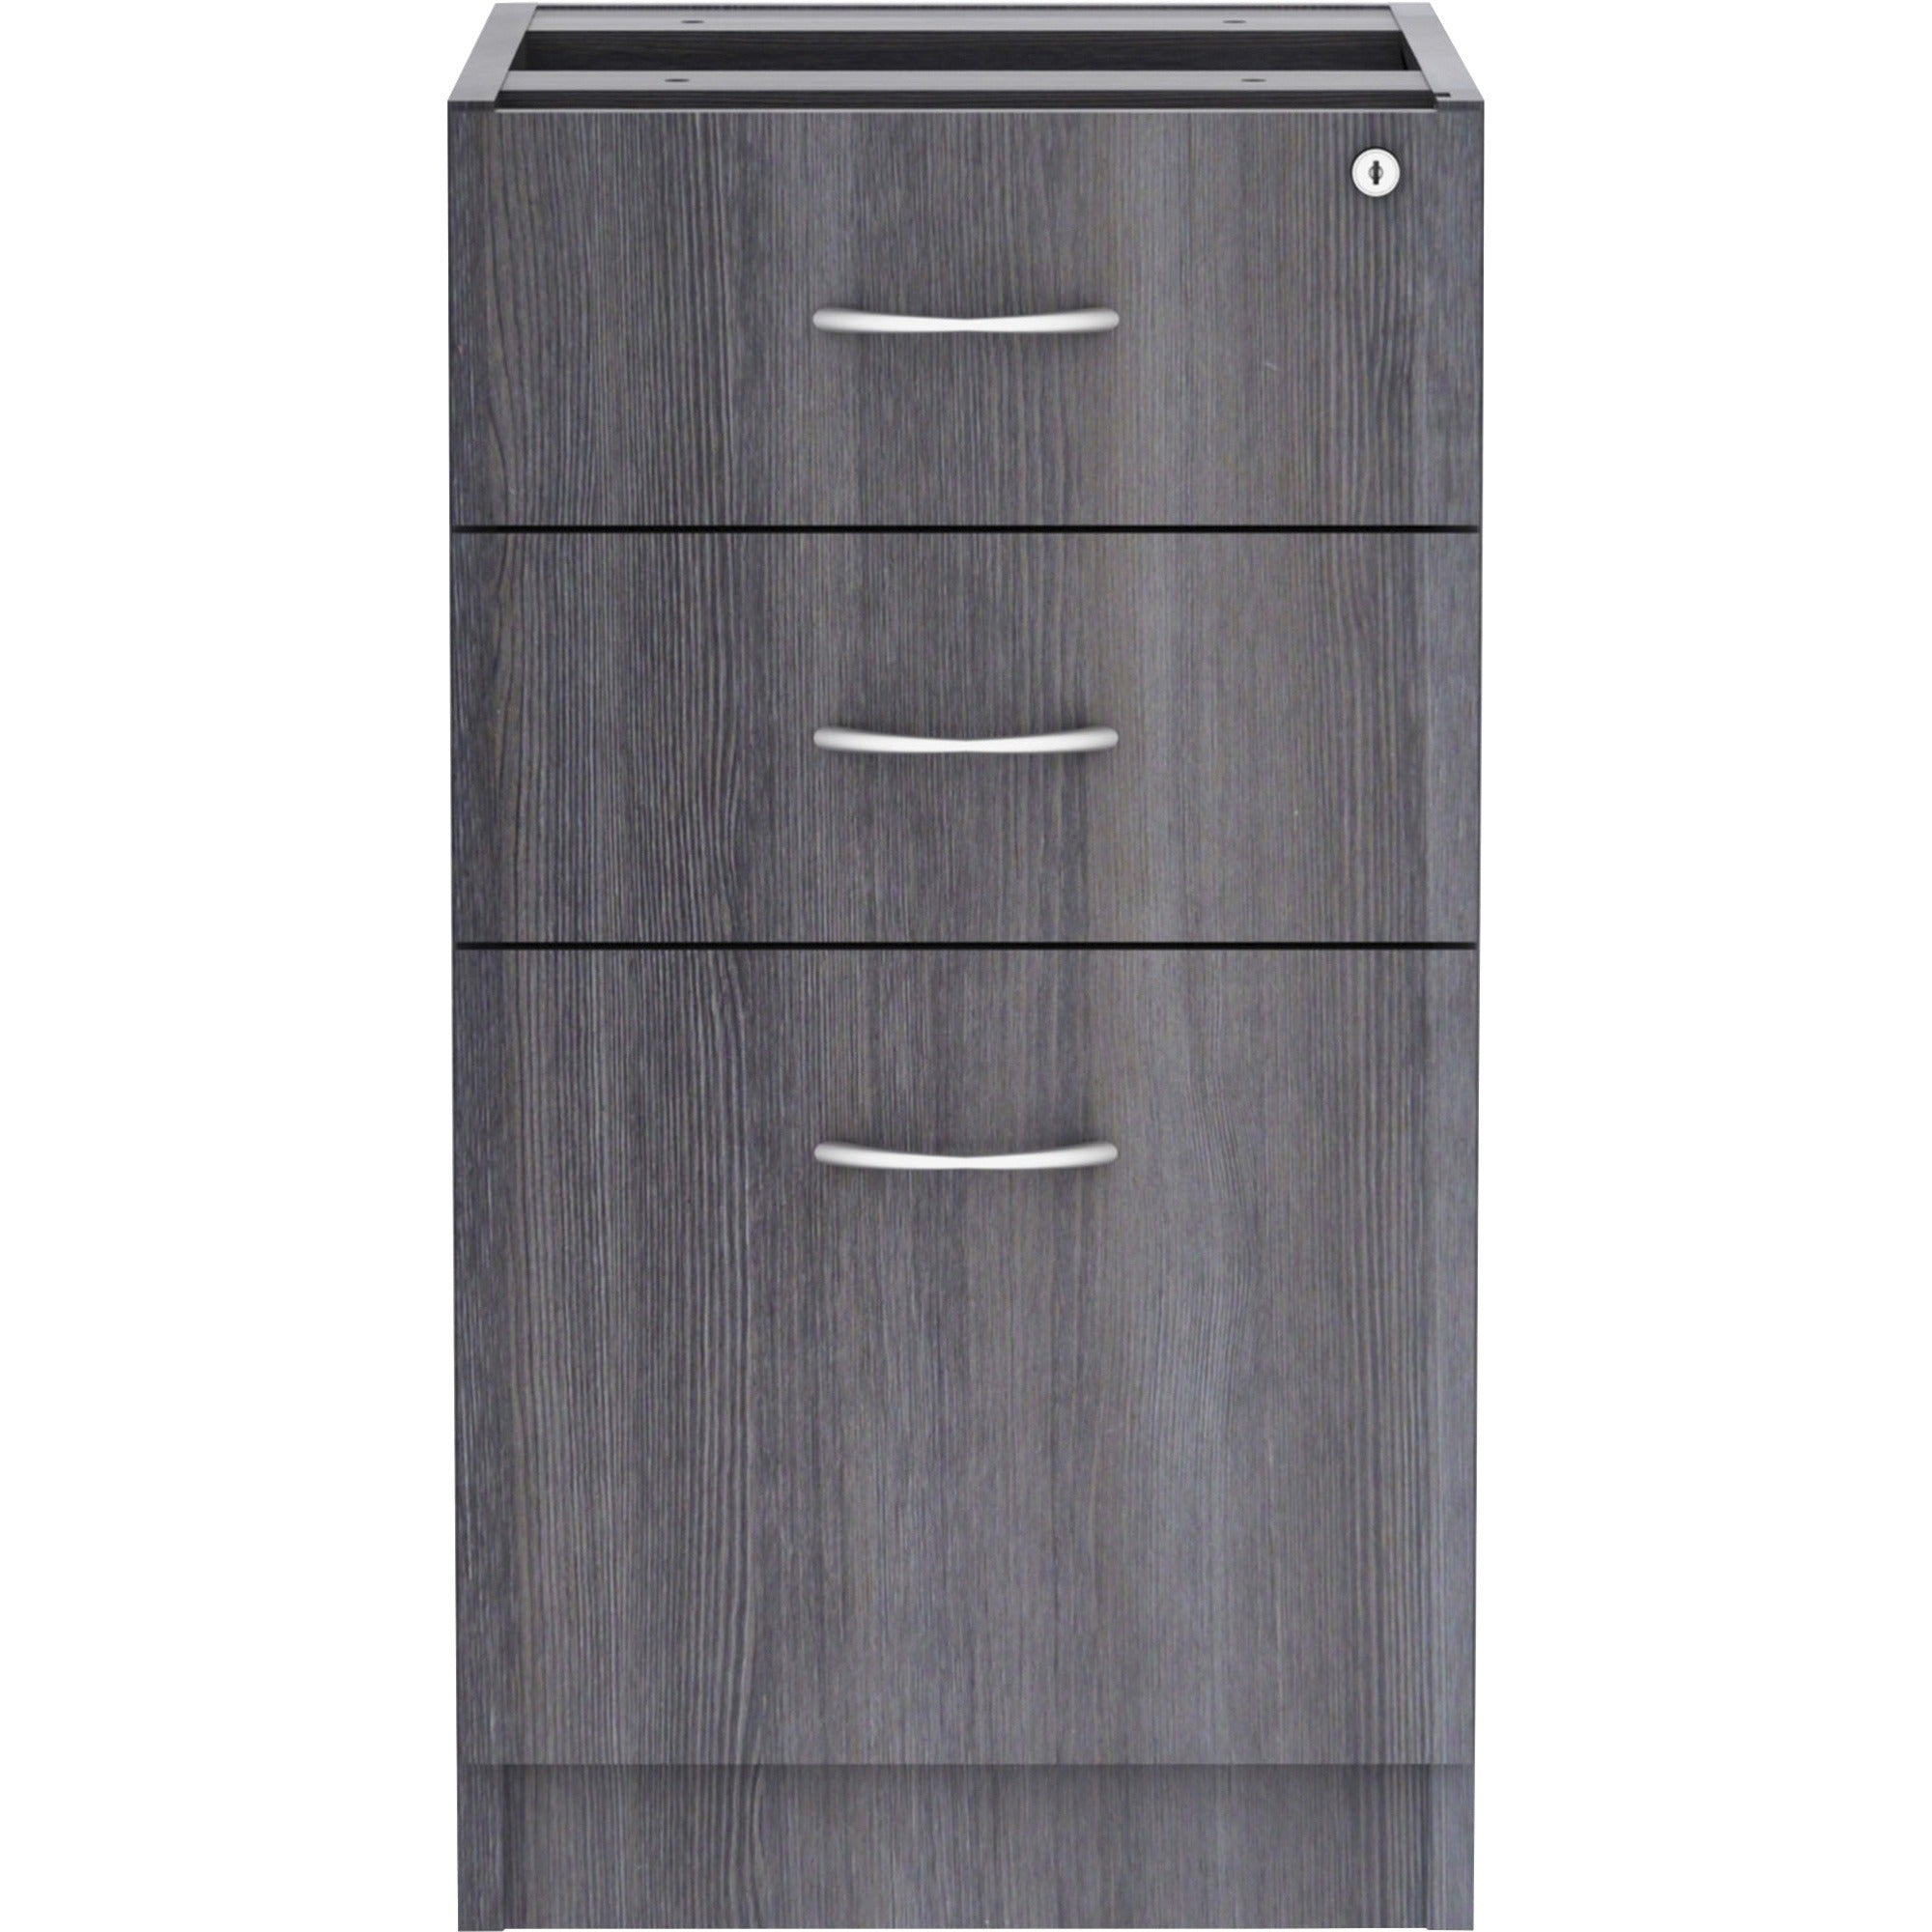 lorell-essentials-series-box-box-file-fixed-file-cabinet-16-x-22283-file-box-drawers-finish-laminate-weathered-charcoal-file-drawer_llr69558 - 2